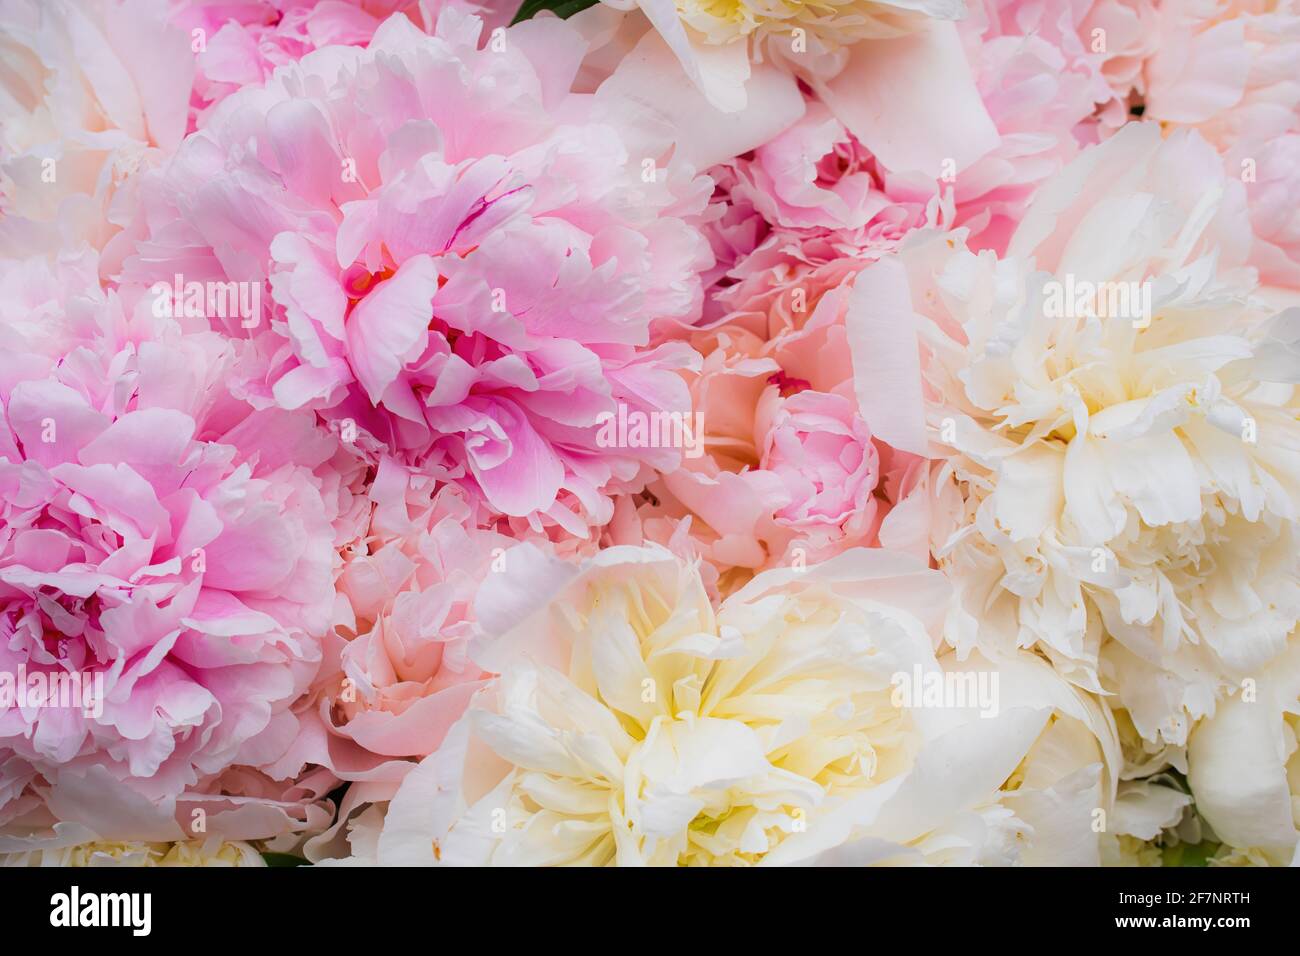 Bright beautiful floral arrangement of pink pion flowers close-up. Stock Photo